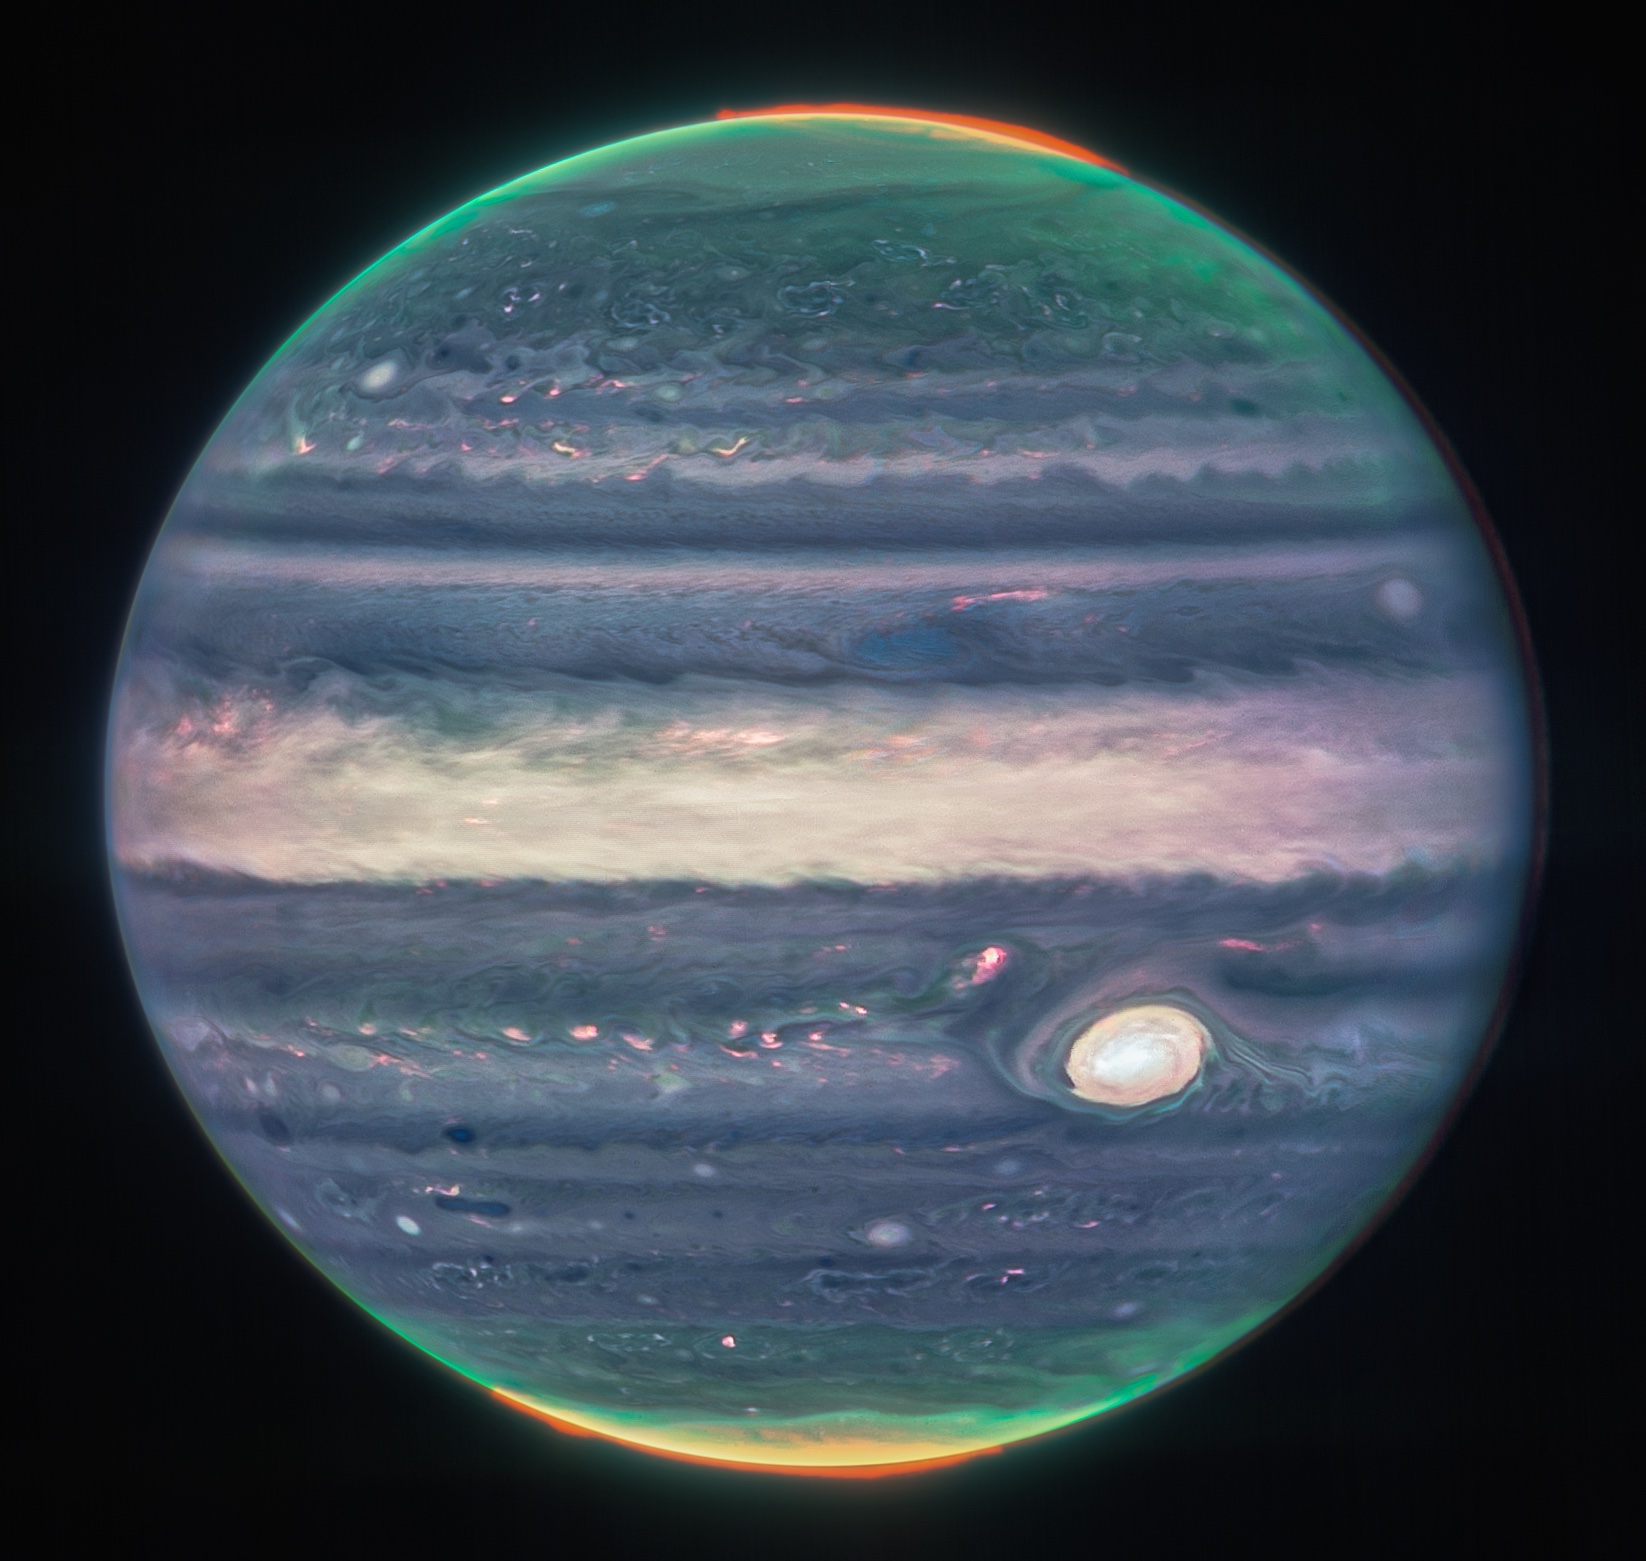 A stormy, iridescent Jupiter shines bright in Webb’s latest images